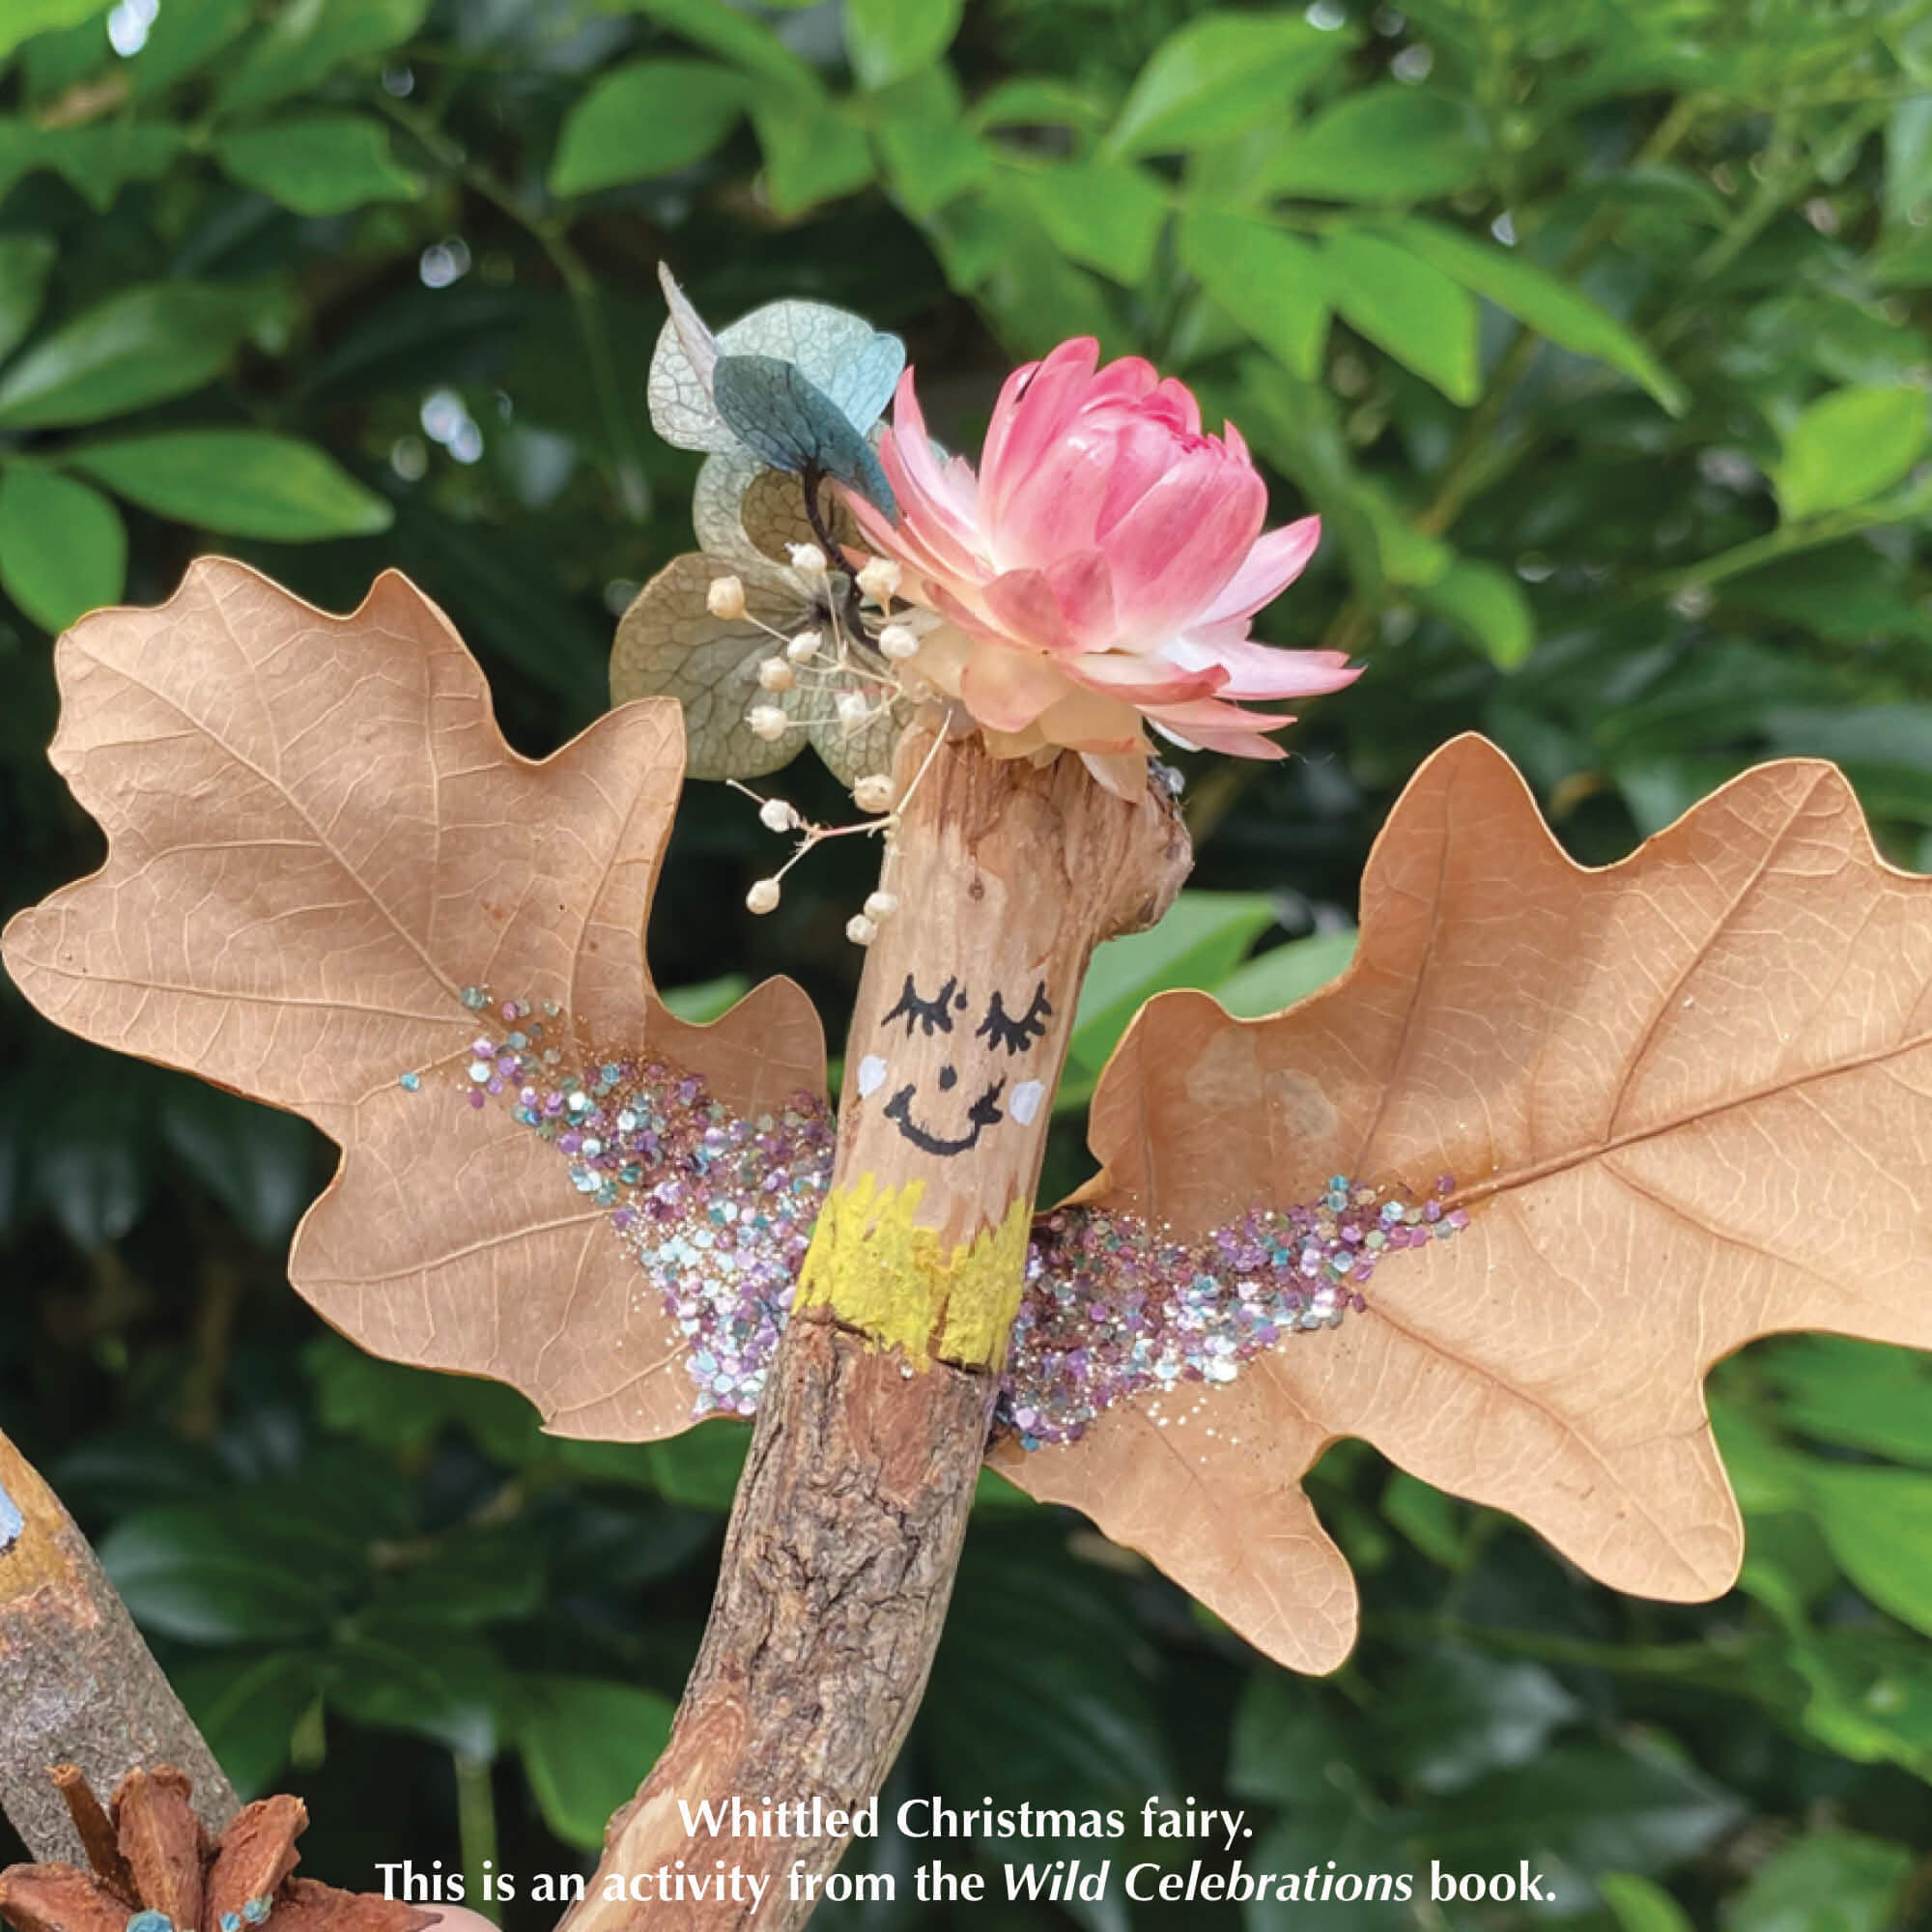 Whittled Christmas fairy from Your Wild Books decorated with paint pen, eco glitter, leaves and flowers